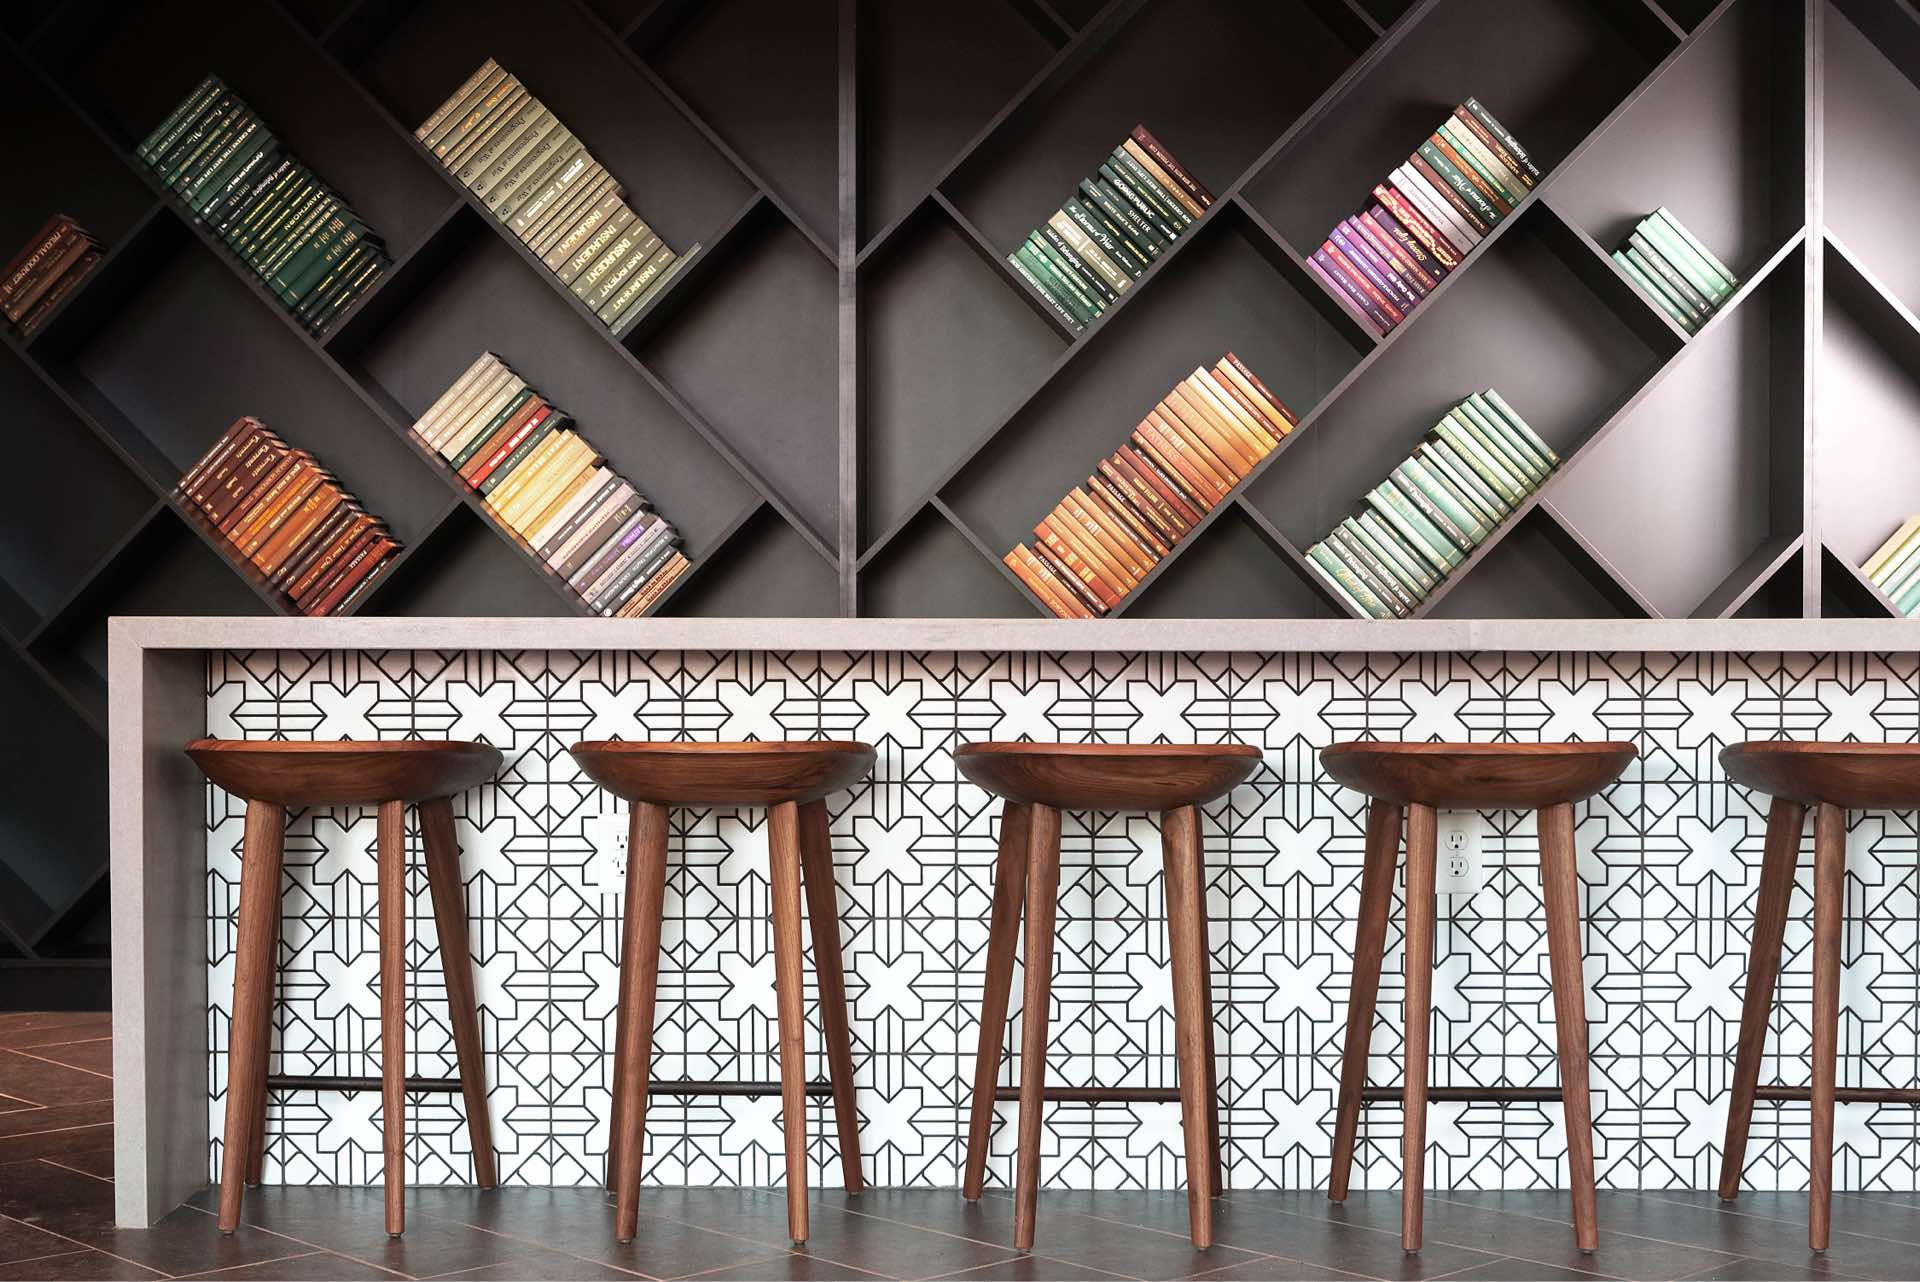 Faraday Park East bar with modern design and wall of books